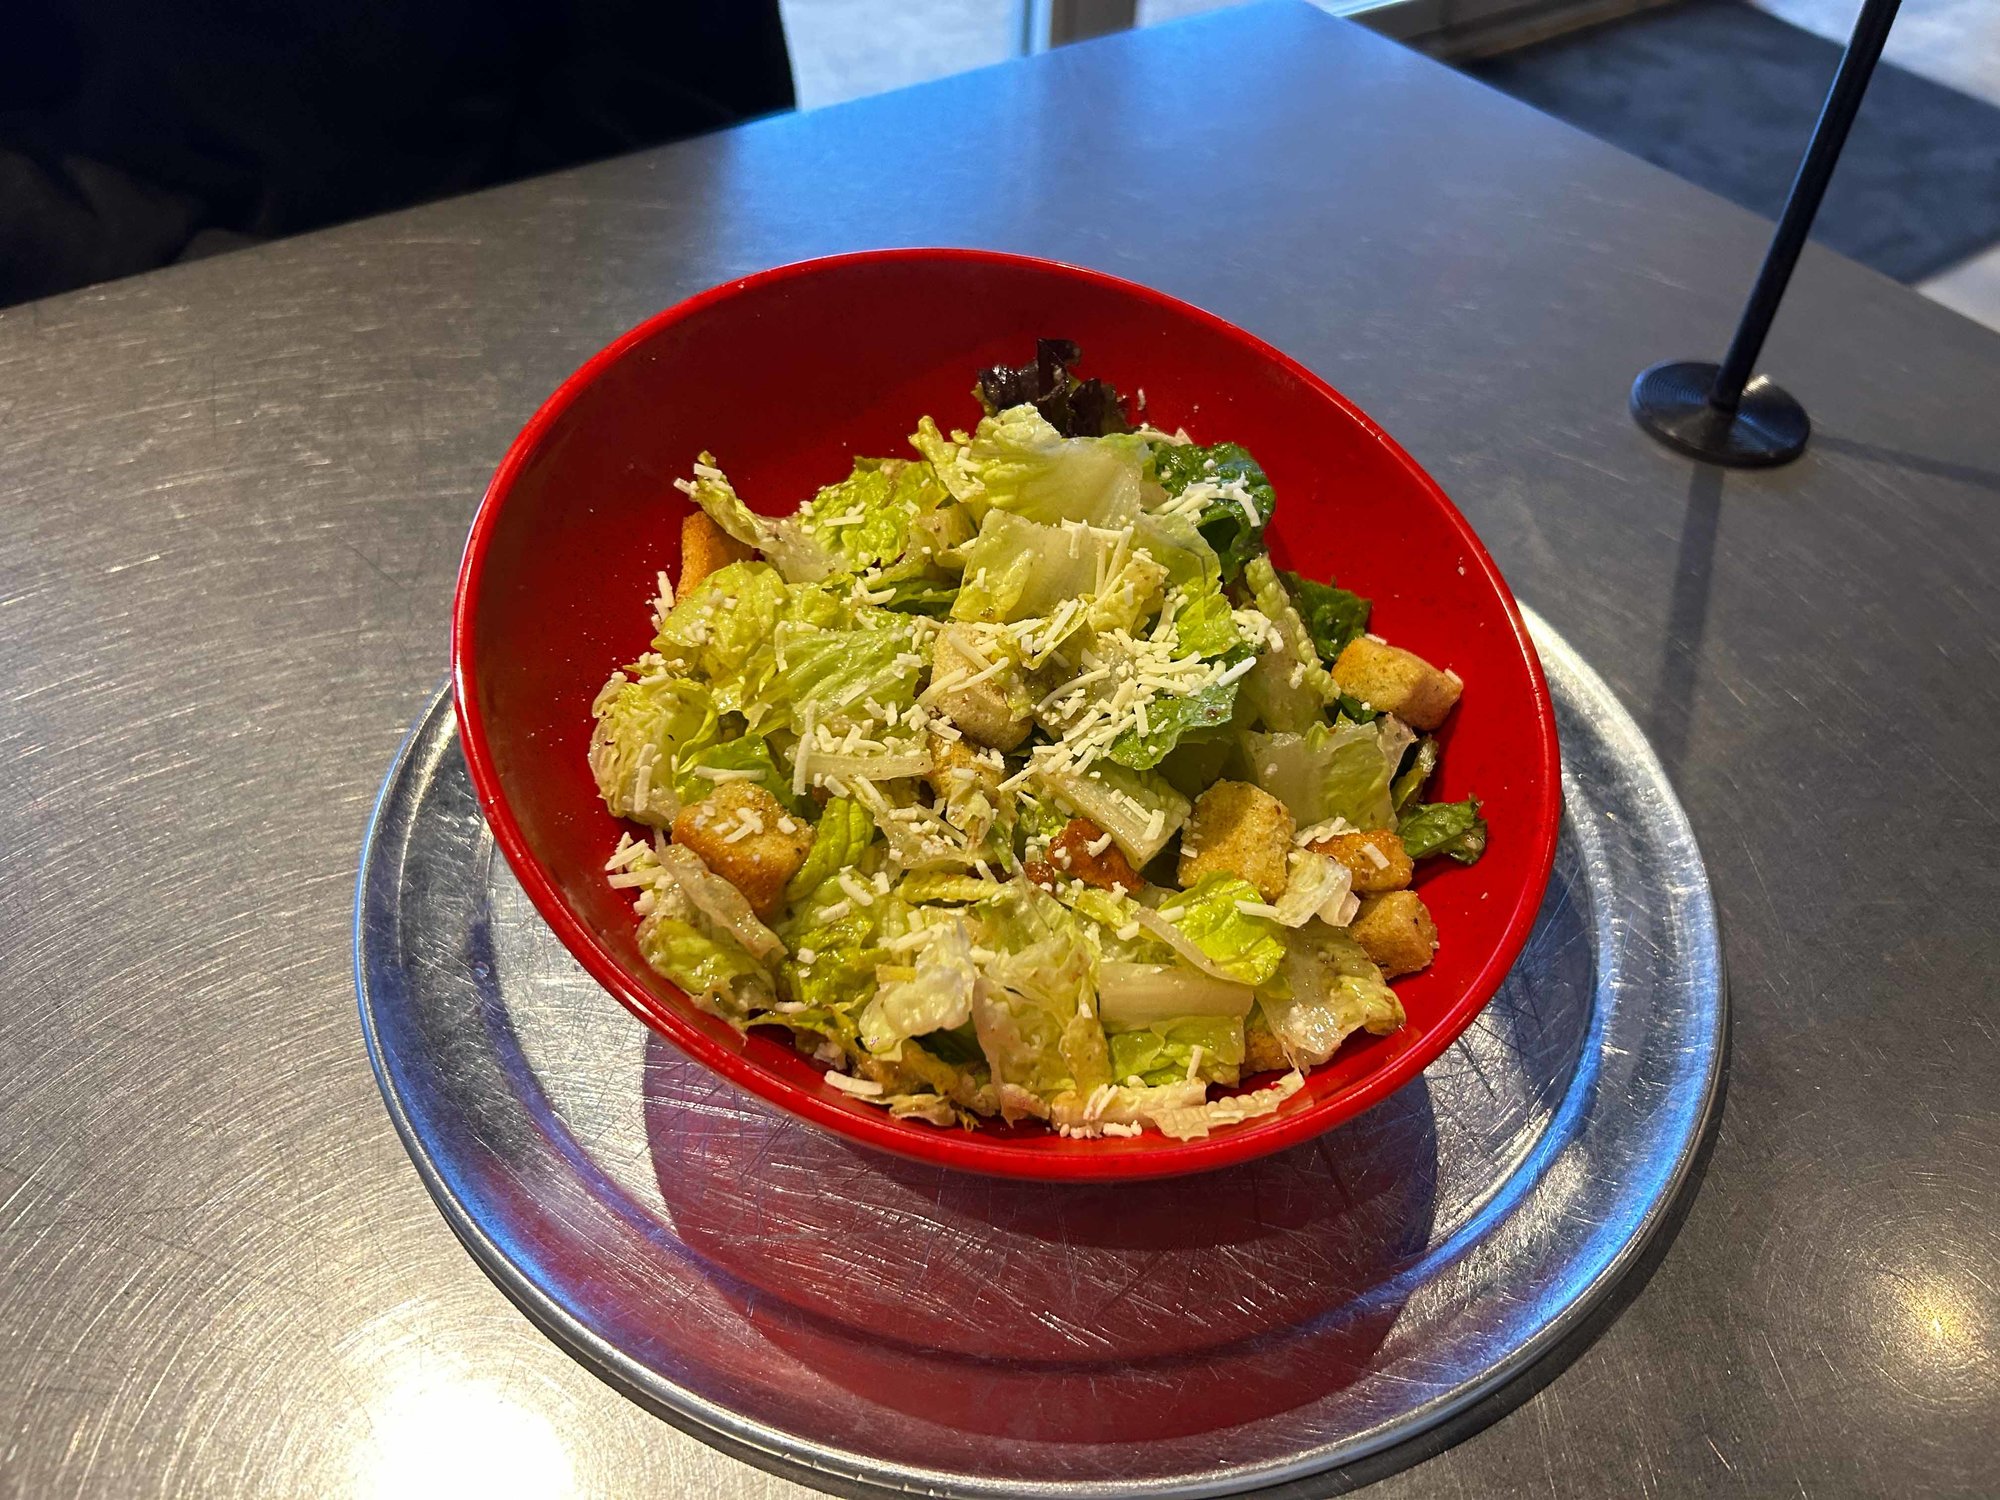 caesar salad in a red bowl on a metal table